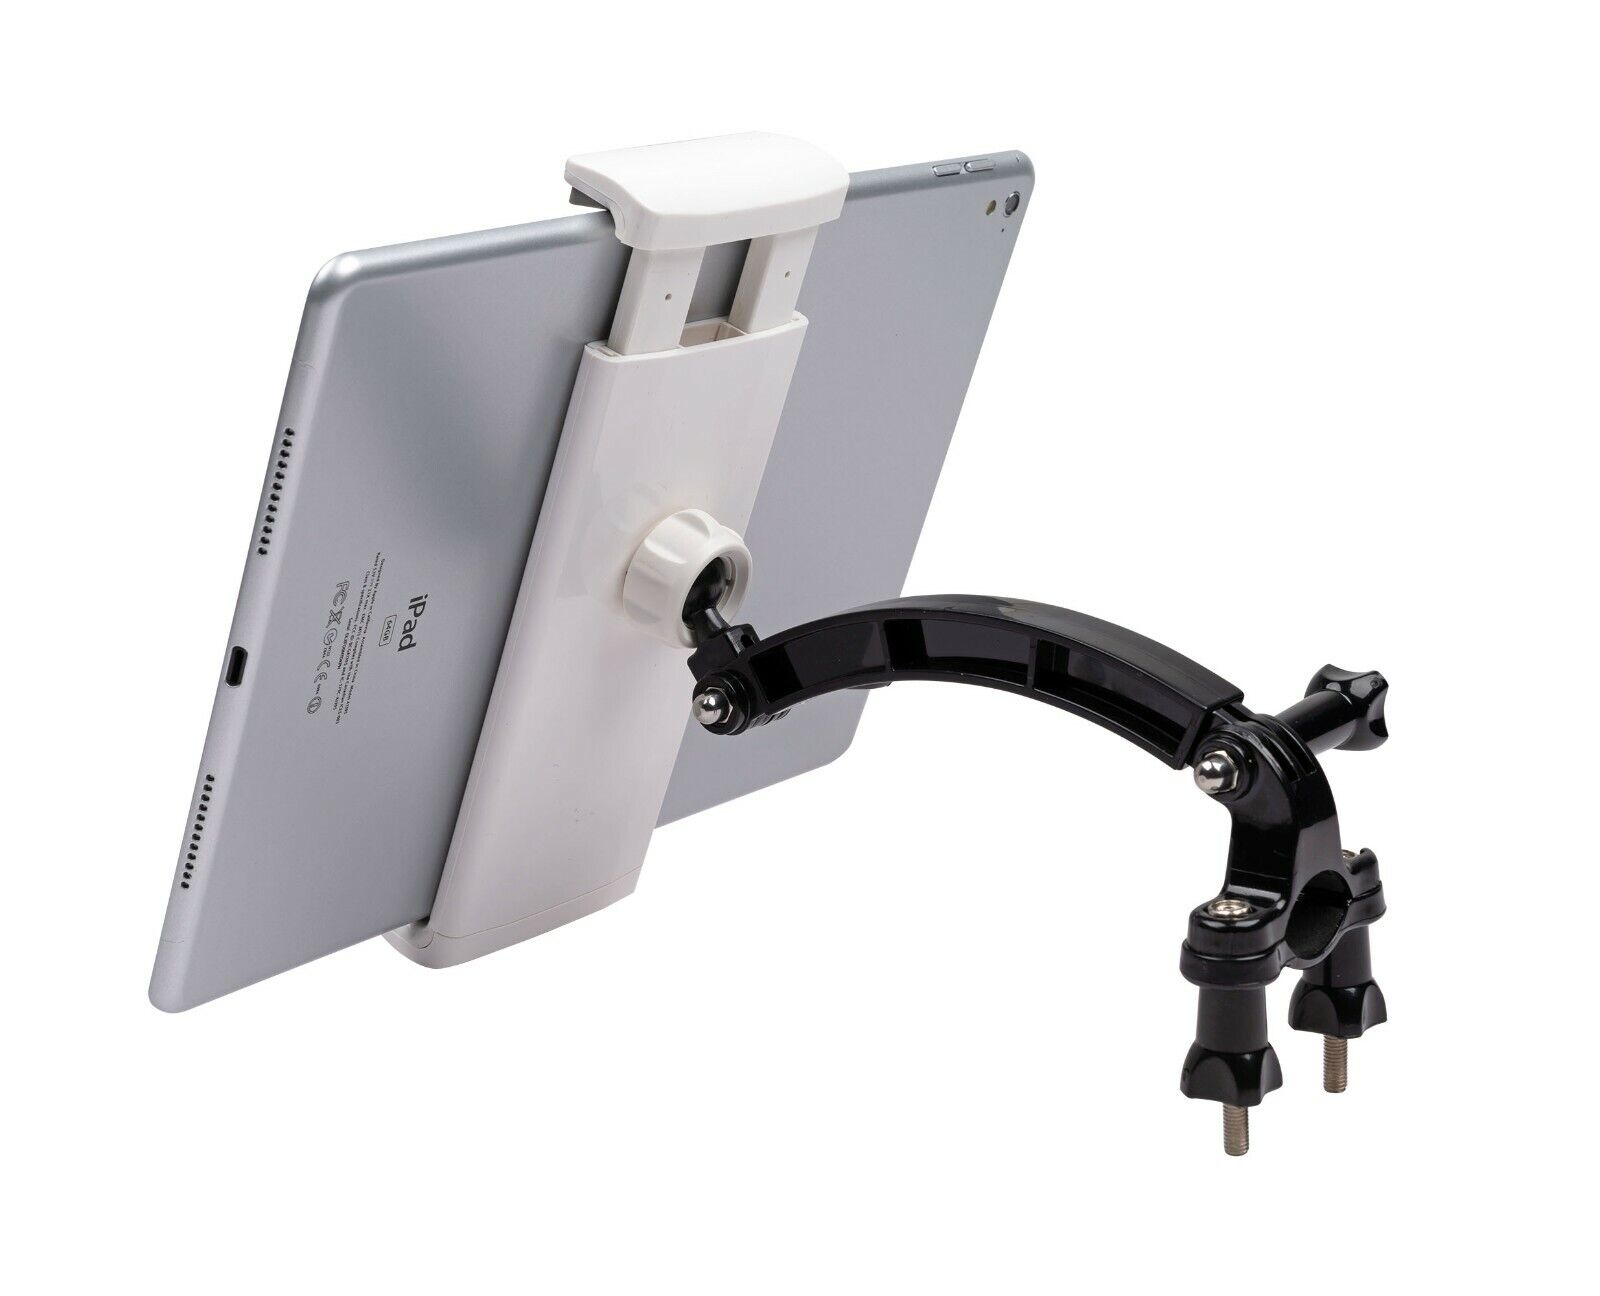 3-in-1 Airplane Yoke Mount for iPad iPhone Pilot EFB Tablet Phone Aircraft Plane